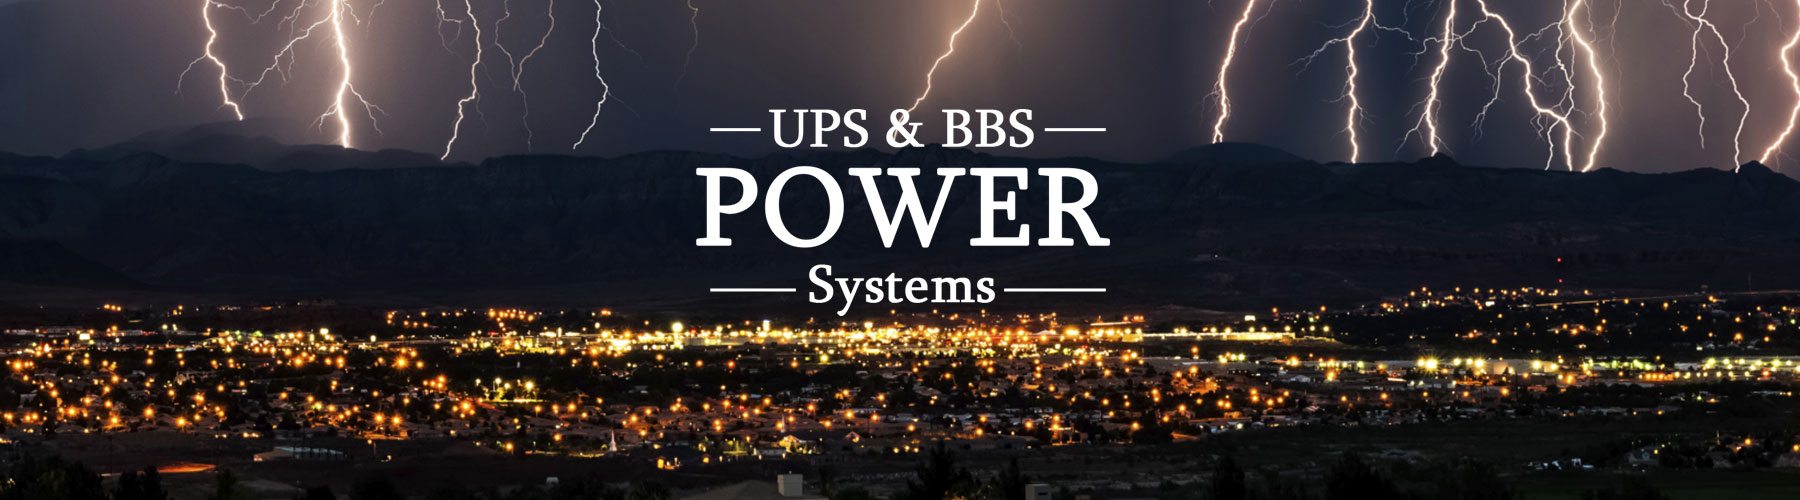 ups-bbs-power-systems